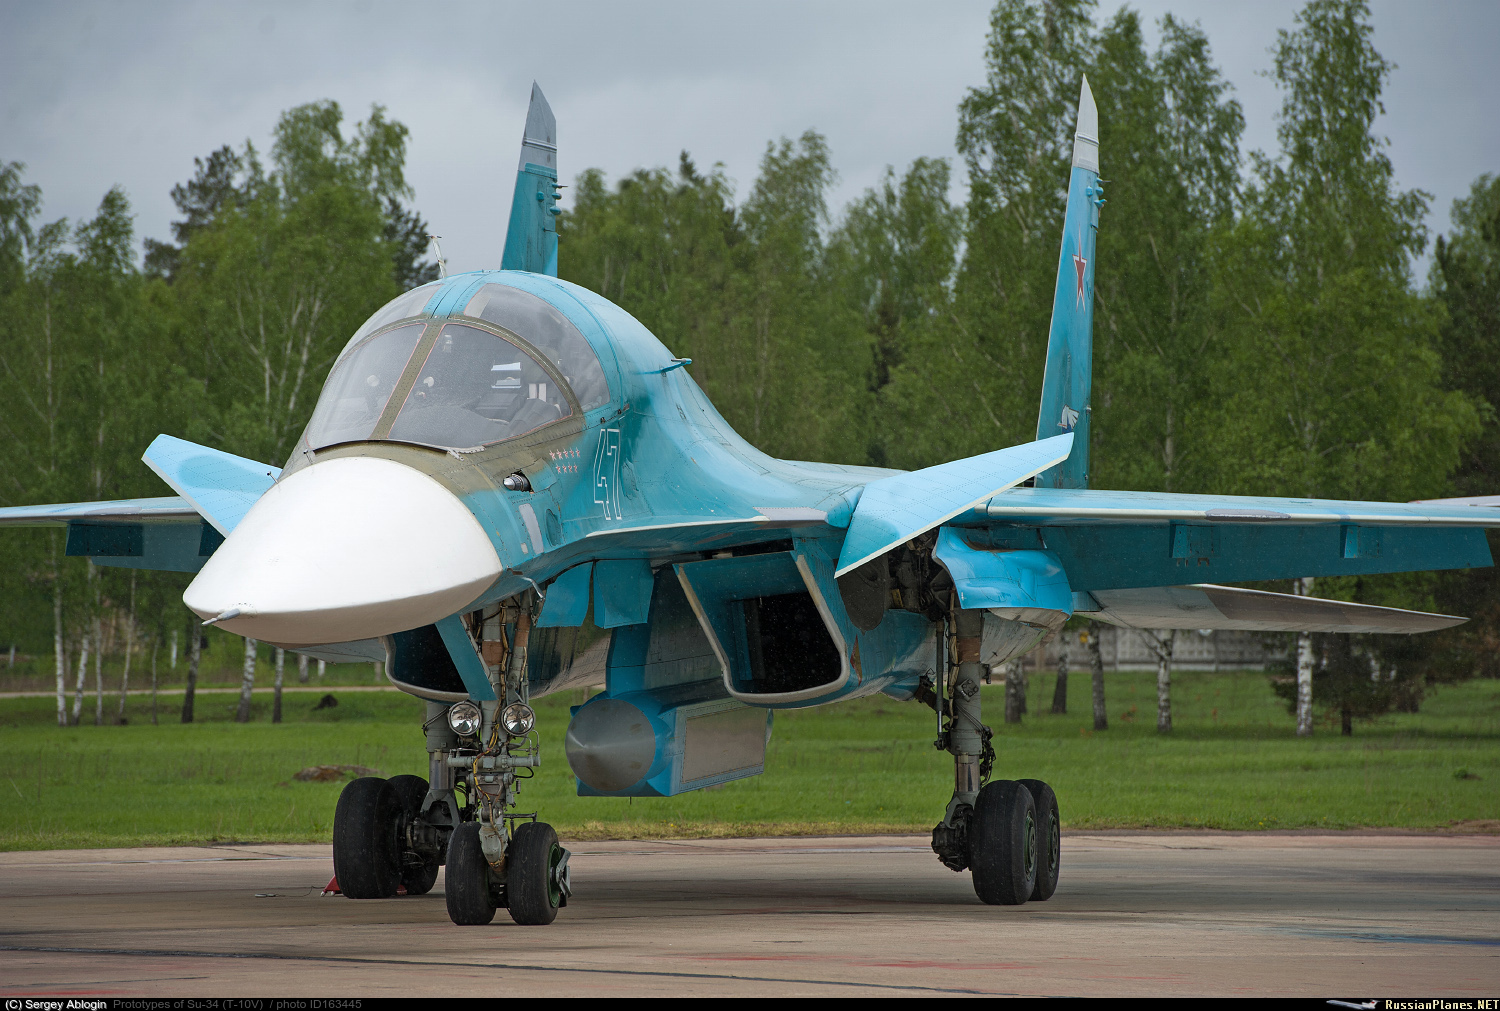 http://russianplanes.net/images/to164000/163445.jpg